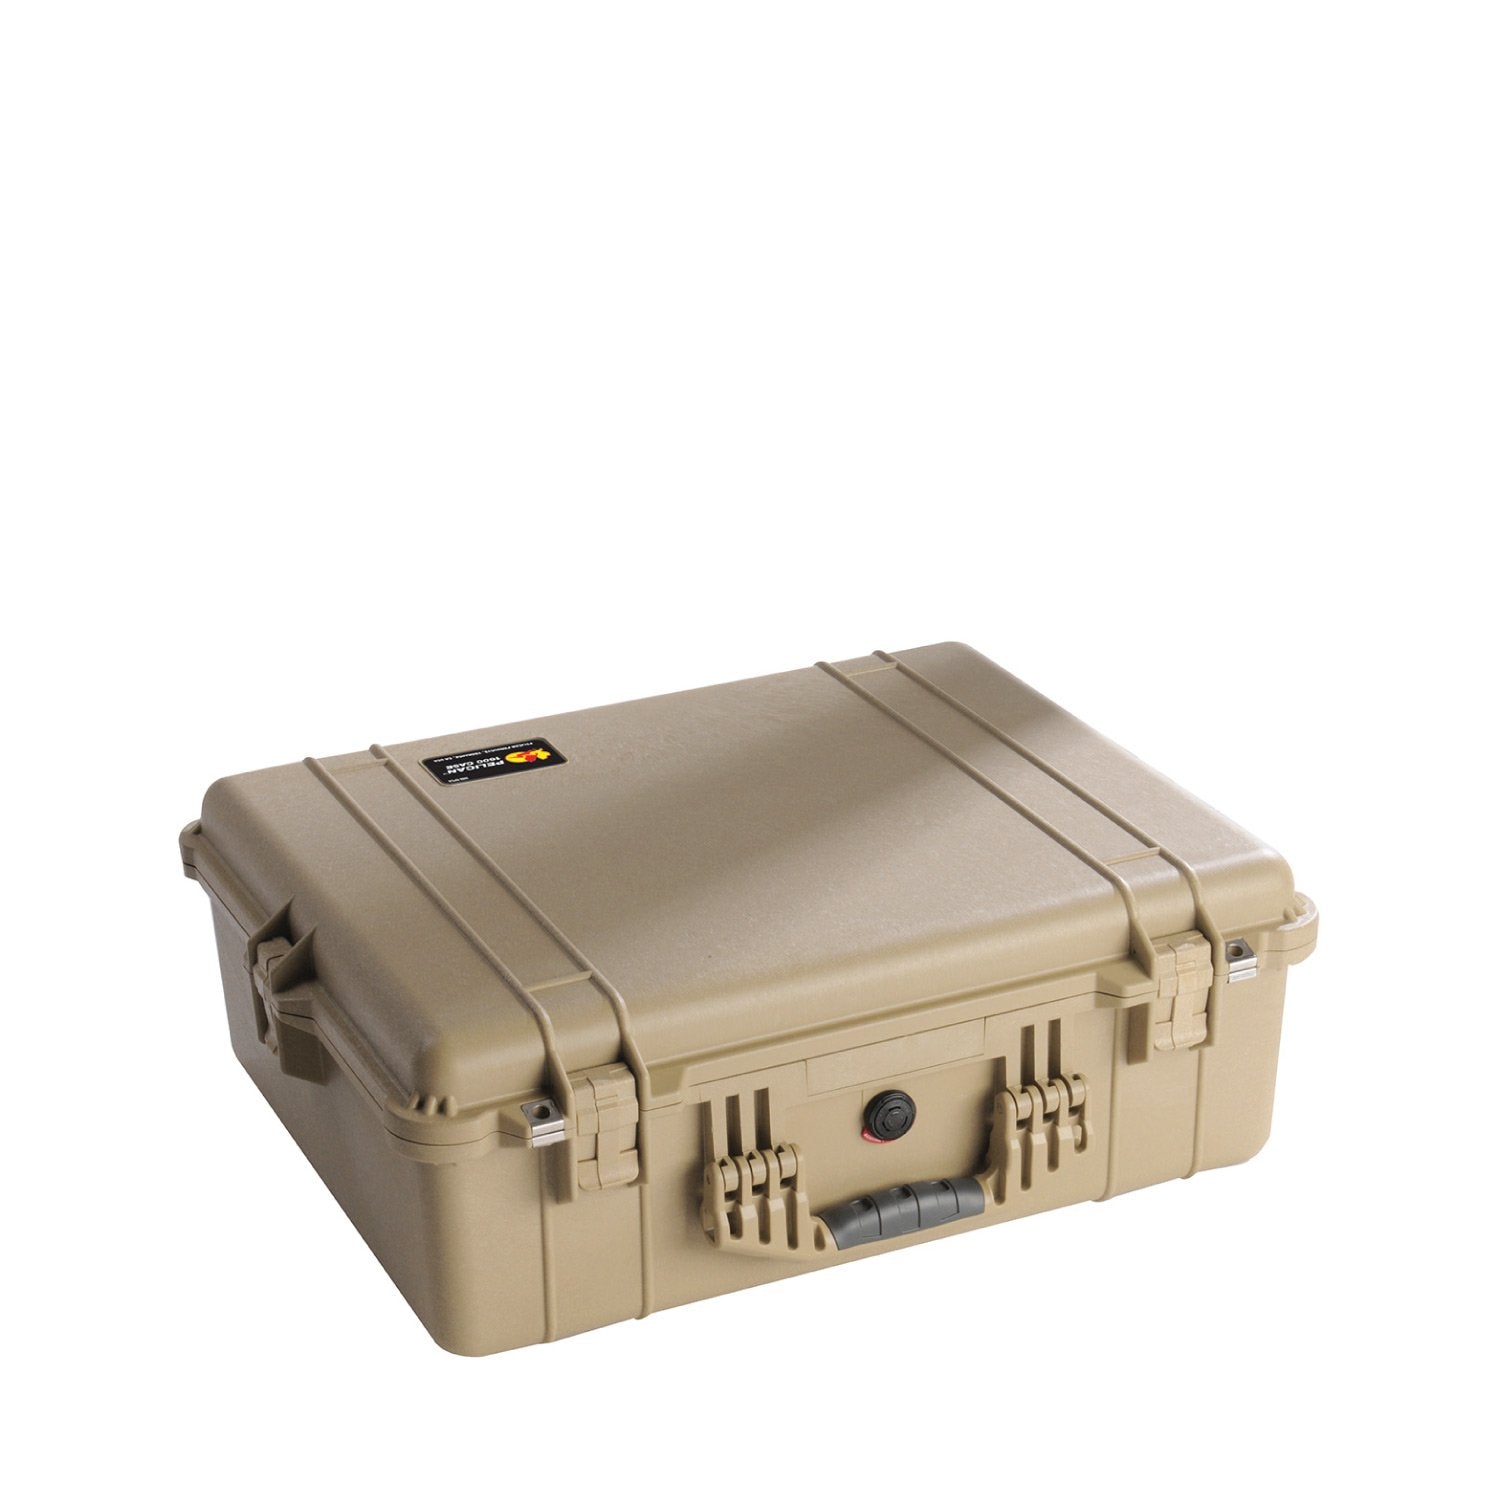 Pelican 1600 Classic Large Hard Case Desert Tan Bags, Packs and Cases Pelican Products With Foam Tactical Gear Supplier Tactical Distributors Australia